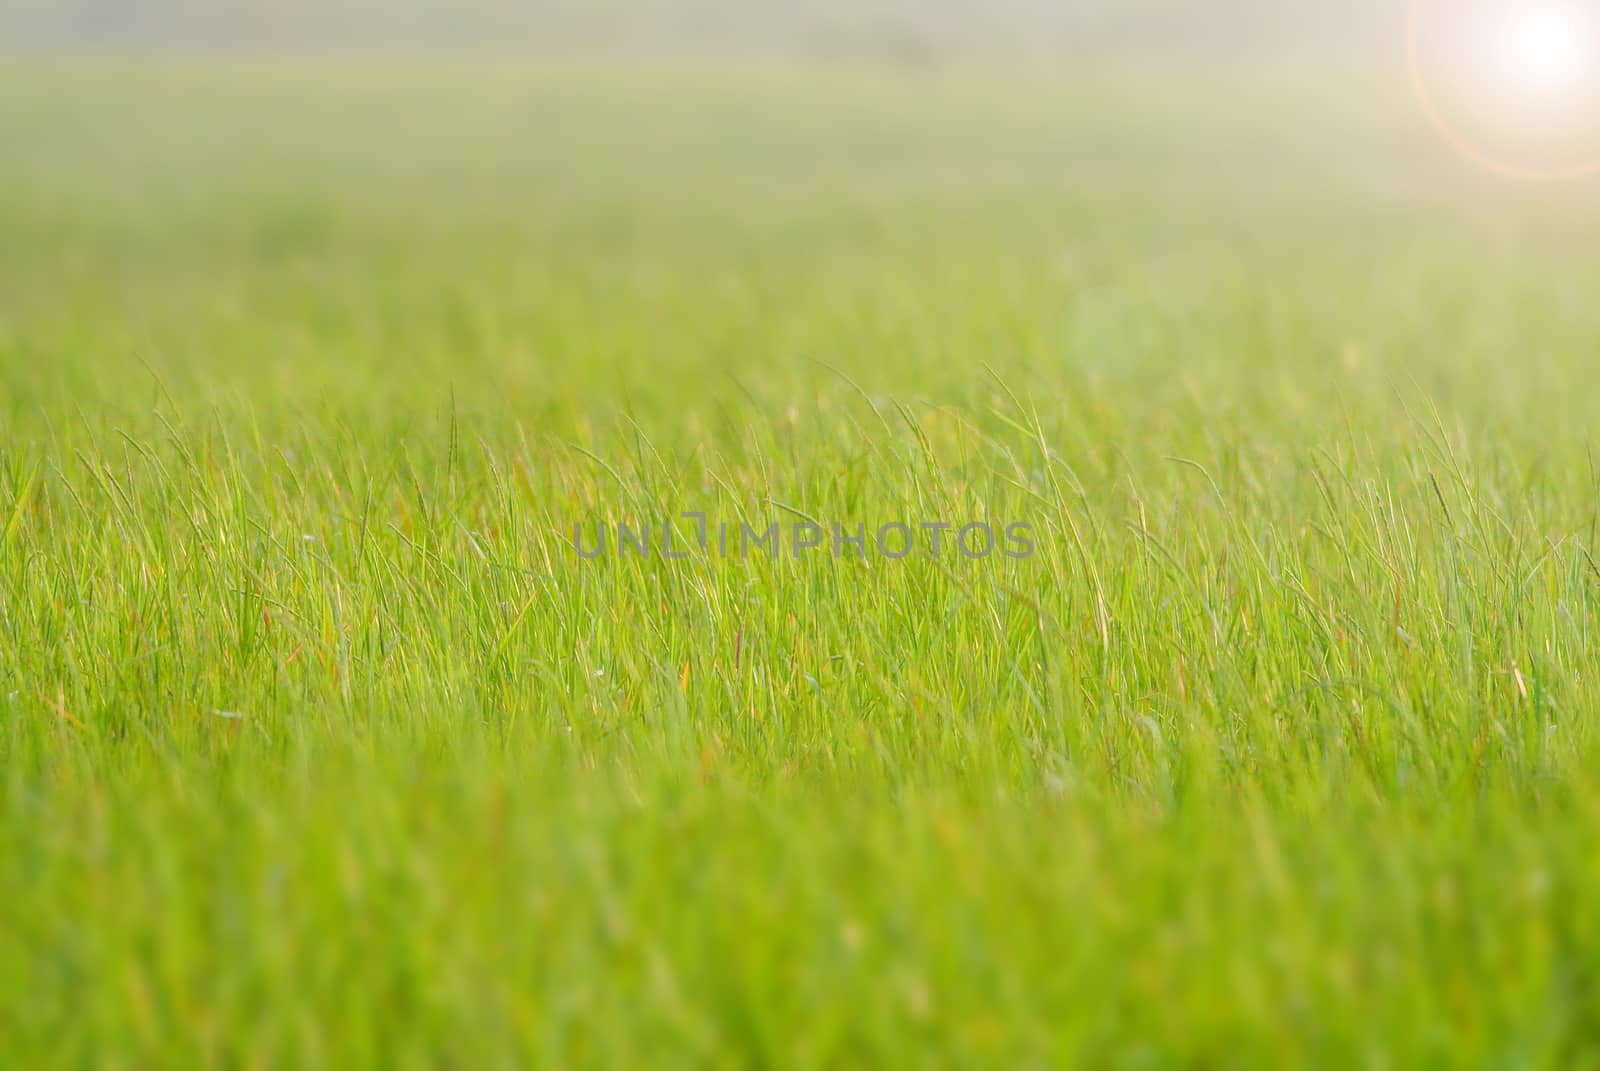 Blurry grass on a background of a field
